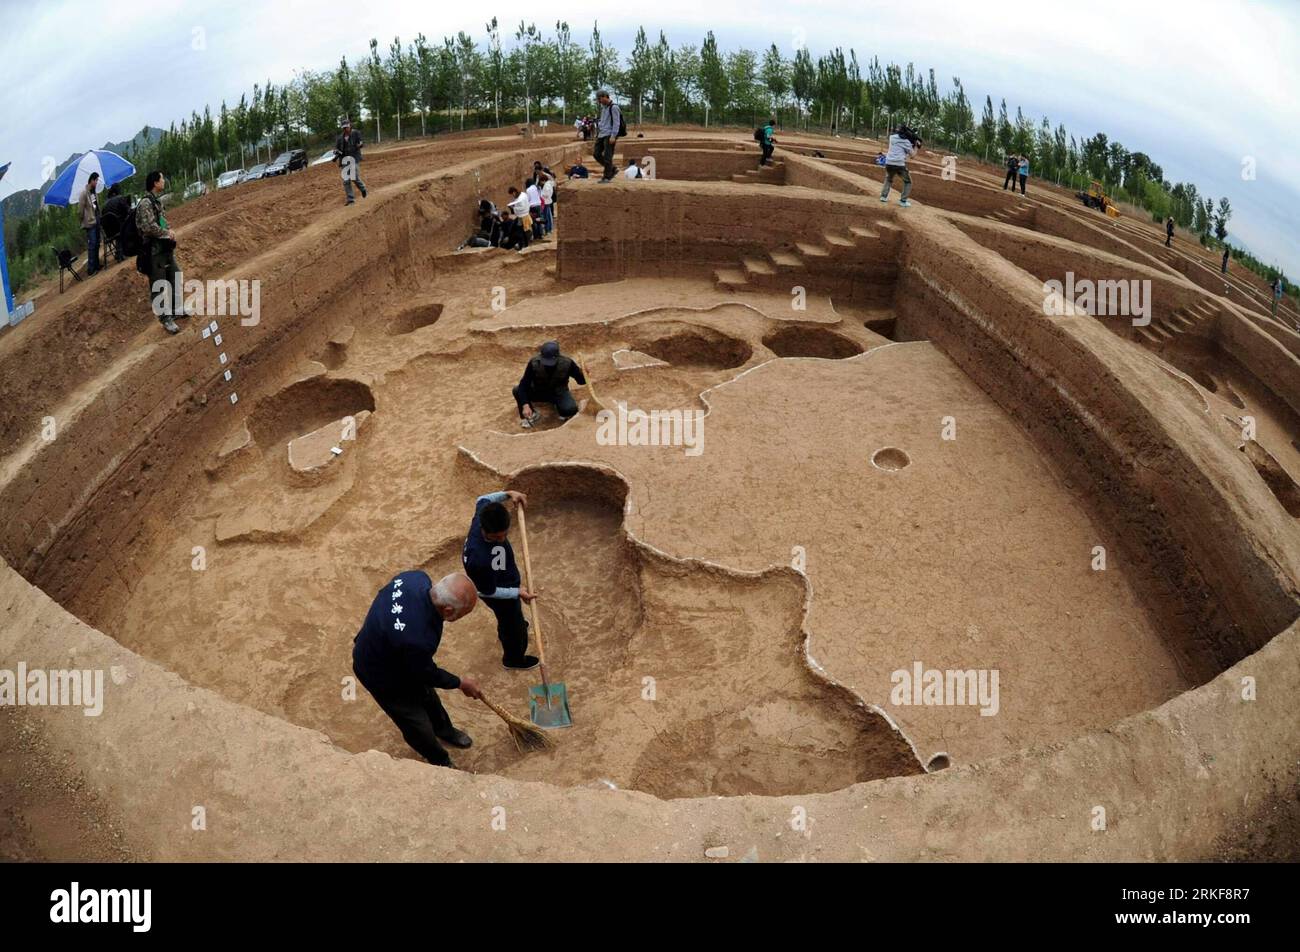 Bildnummer: 55373636  Datum: 20.05.2011  Copyright: imago/Xinhua (110520) -- BEIJING, May 20, 2011 (Xinhua) -- Archaeological staff members excavate the Hujiaying ruins in Hujiaying Village, Yanqing County of Beijing, capital of China, May 20, 2011. The archaeological team has been excavating the ruins of the Eastern Zhou Dynasty (770-221 B.C.) since Mary 11, 2011. Some 60 sites of remains have been discovered, including 24 house sites, 21 ash pits, 11 kitchen range sites and four ditches, while potteries, stone implements, bone tools, iron implements and bronze objects were excavated. (Xinhua Stock Photo